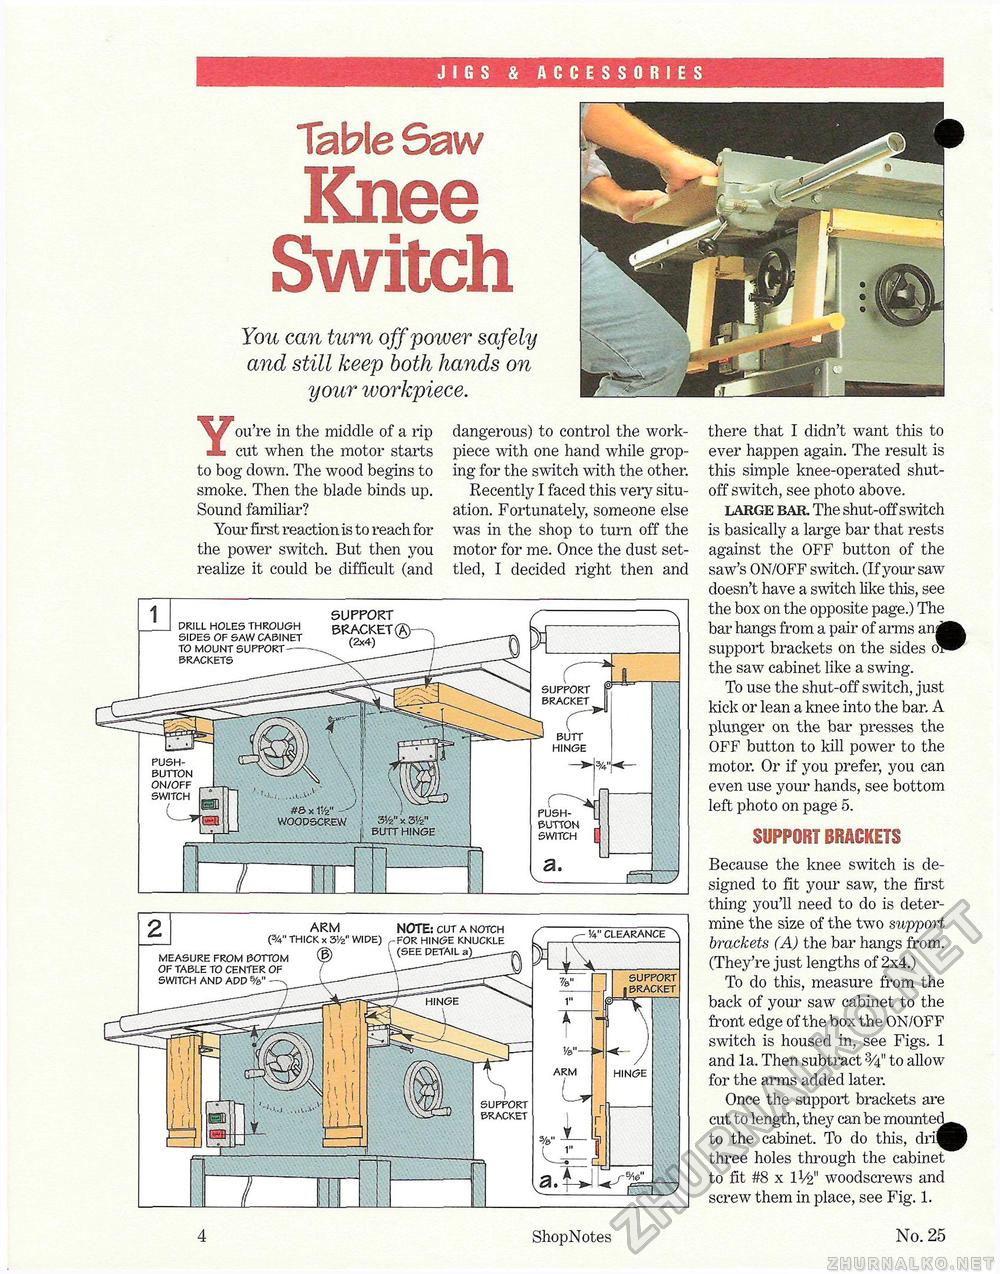 25 - Special Table Saw Issue,  4